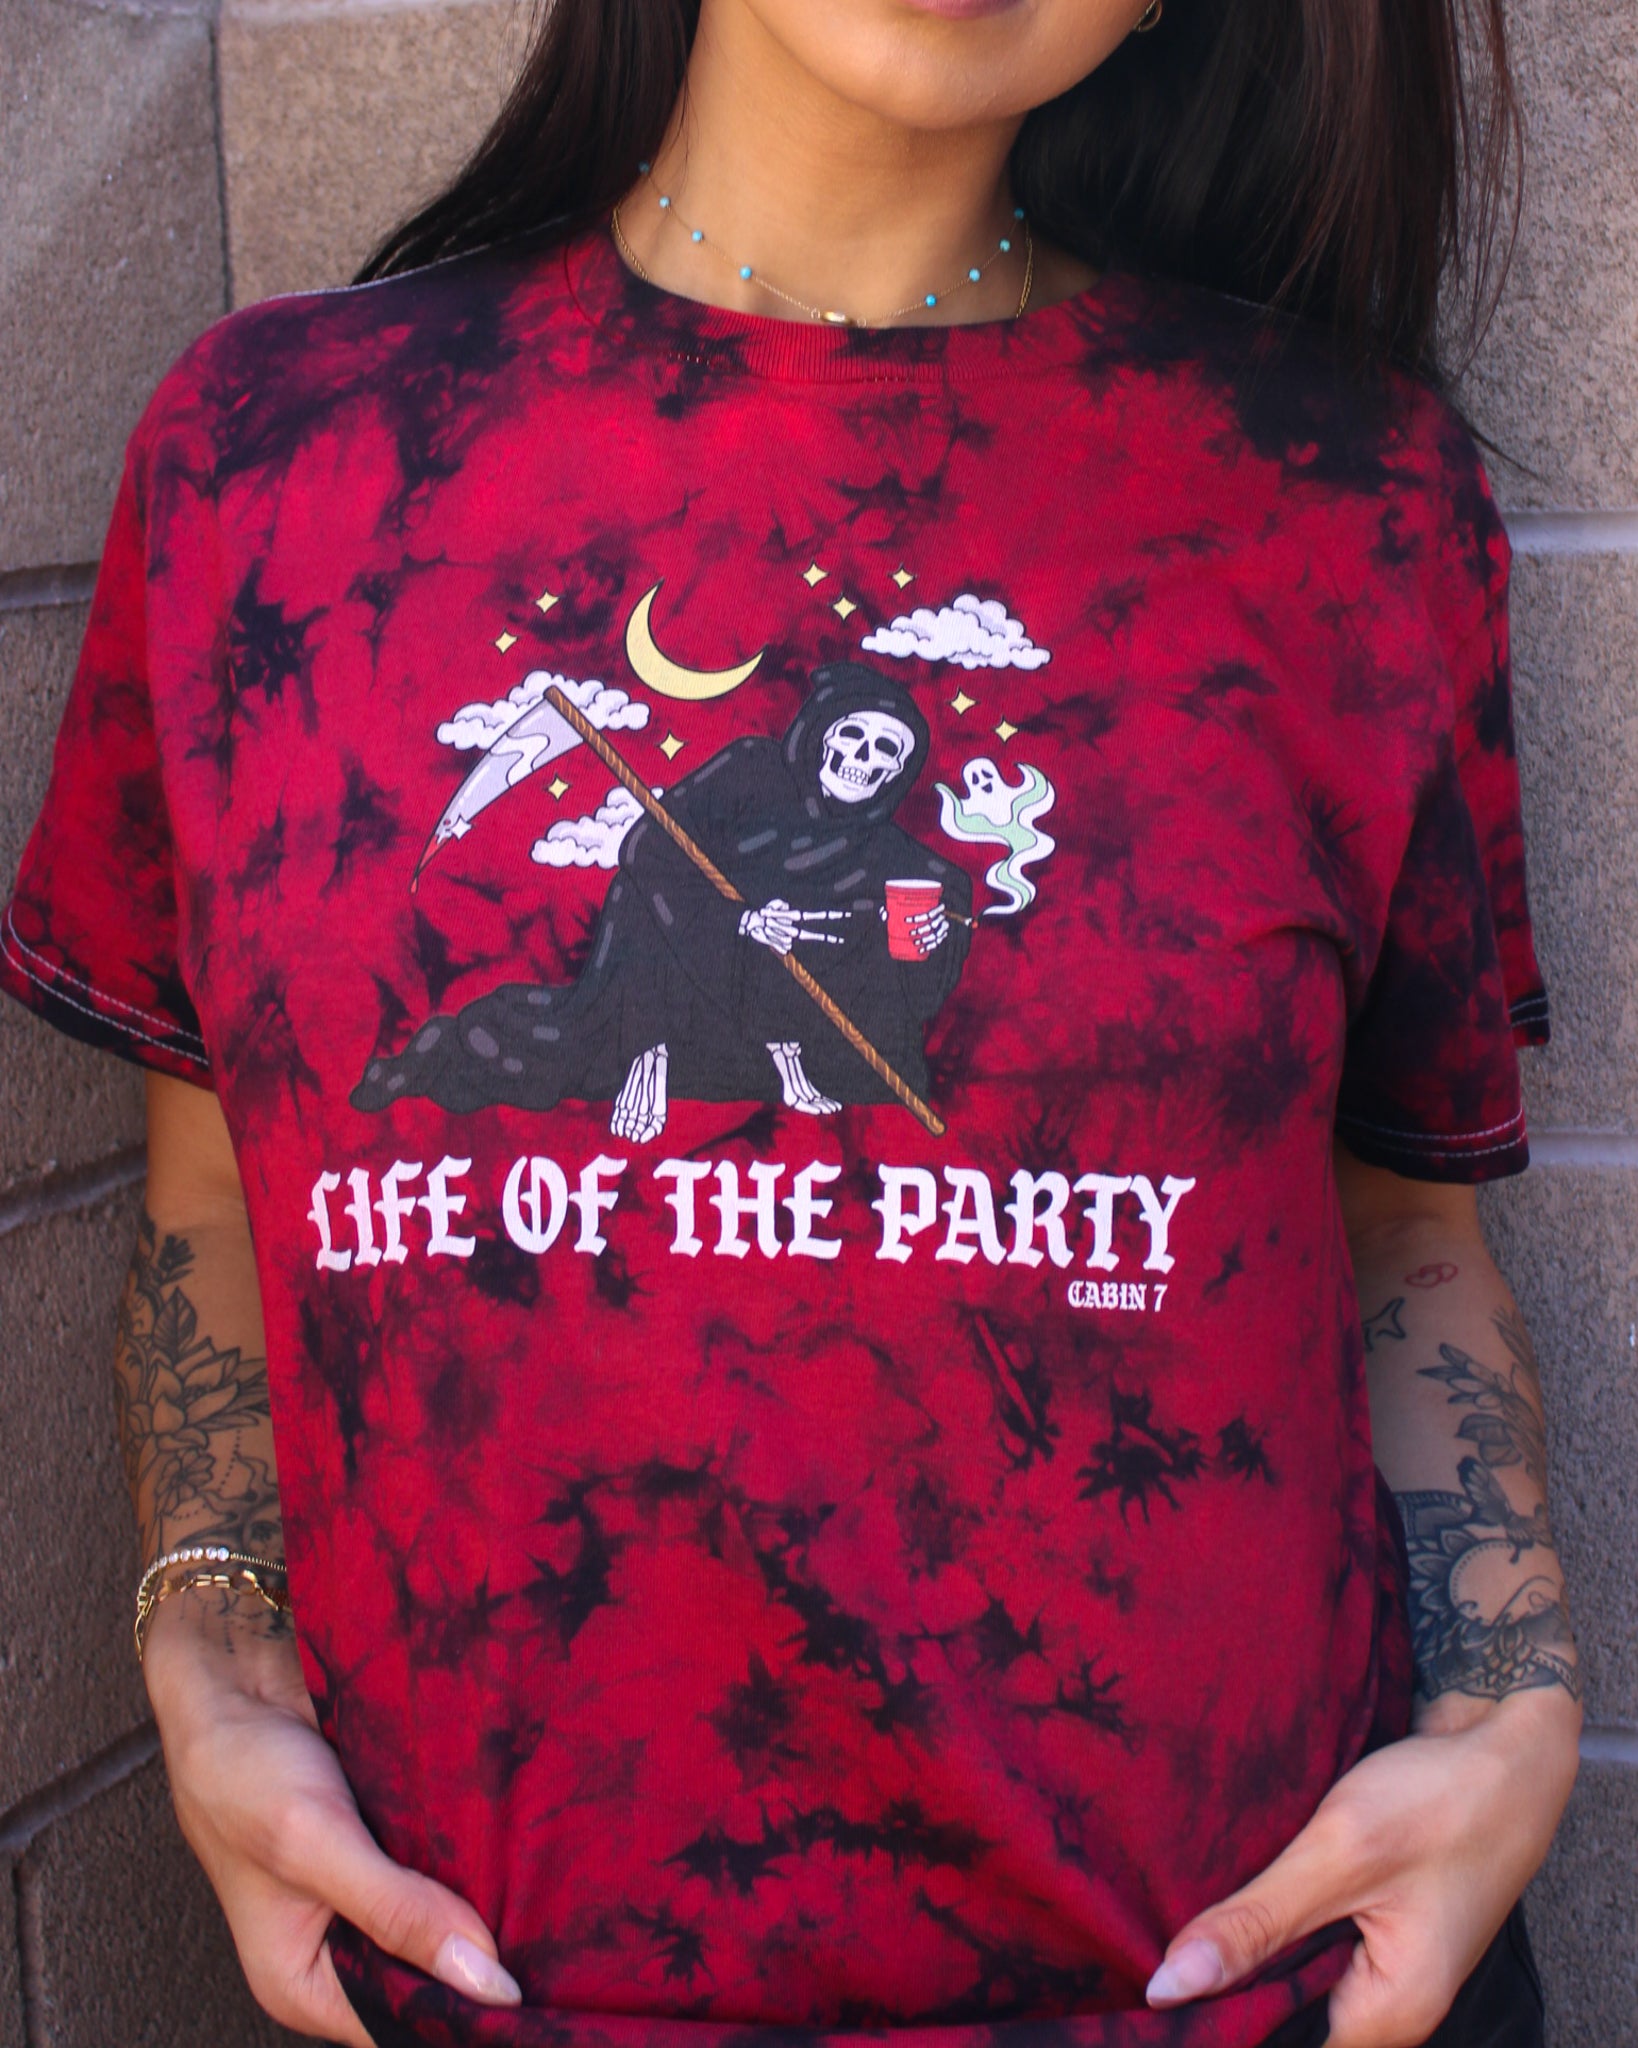 Life of the Party Tie Dye T-Shirt